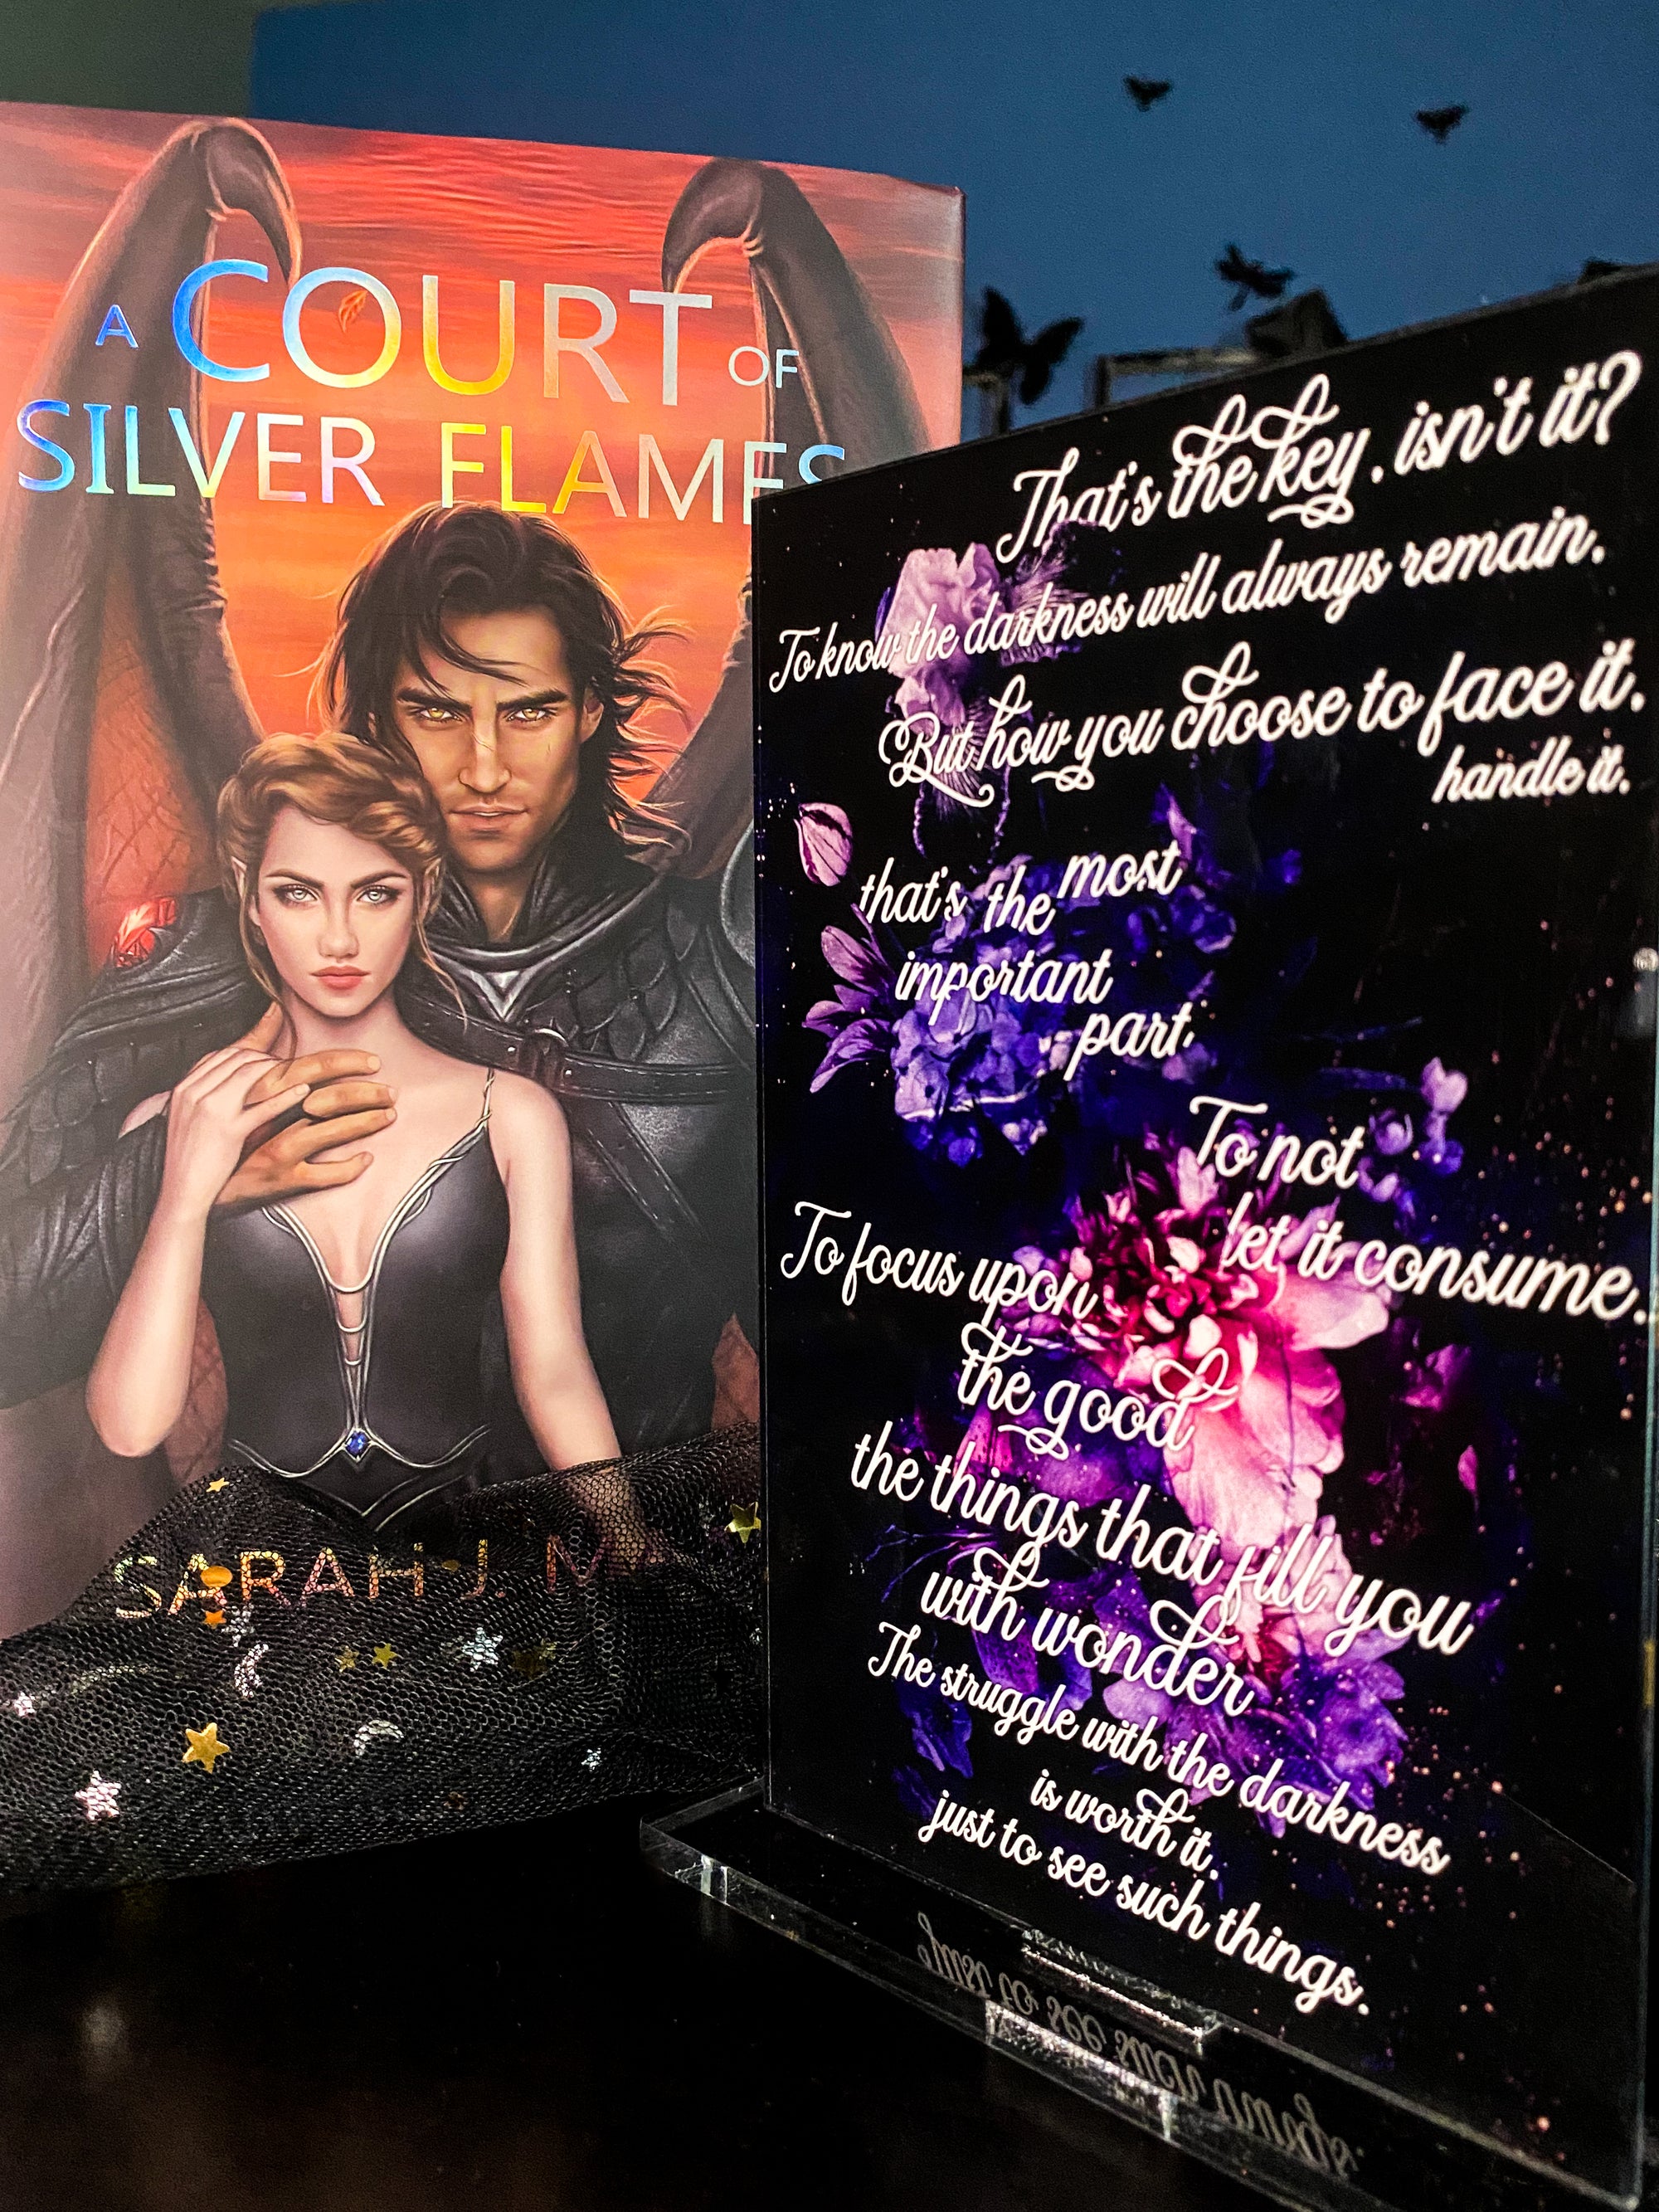 "The struggle with the darkness is worth it." - A Court of Thorns and Roses Series - Freestanding Bookshelf / Desktop Acrylic Accessory - Officially licensed by Sarah J. Maas - D16